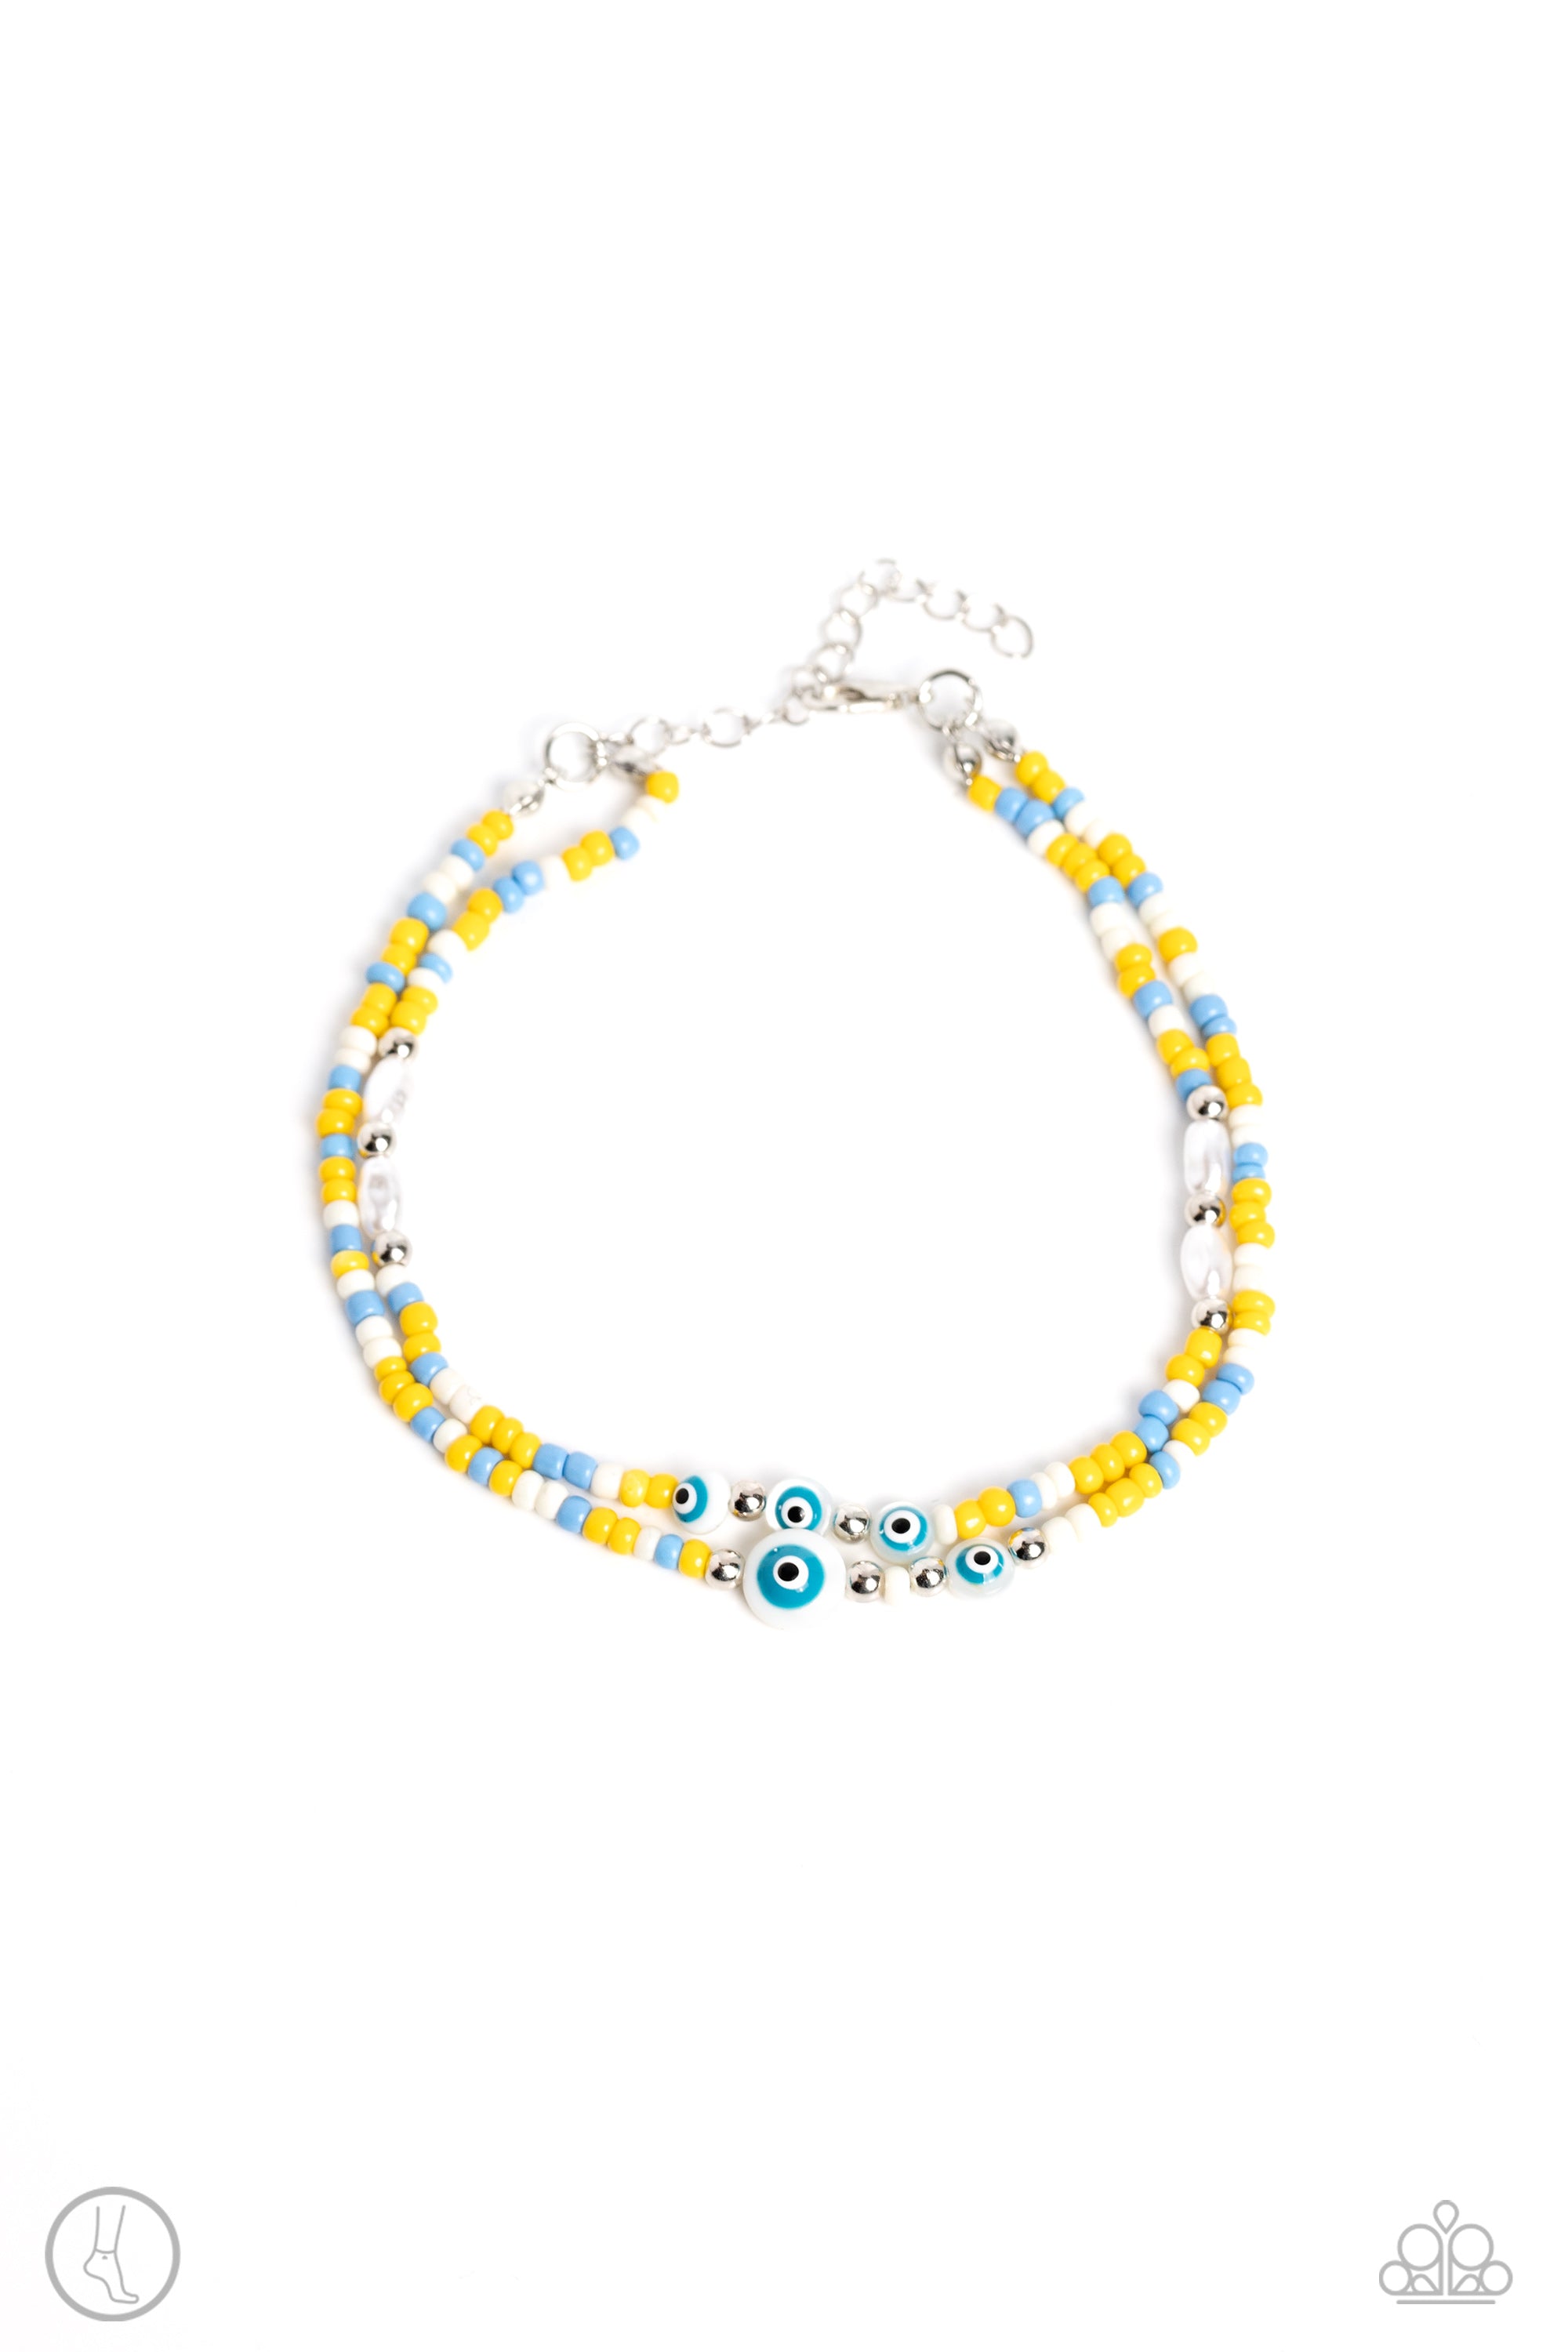 Enchanting Energy Yellow, Blue & White Seed Bead Anklet - Paparazzi Accessories- lightbox - CarasShop.com - $5 Jewelry by Cara Jewels